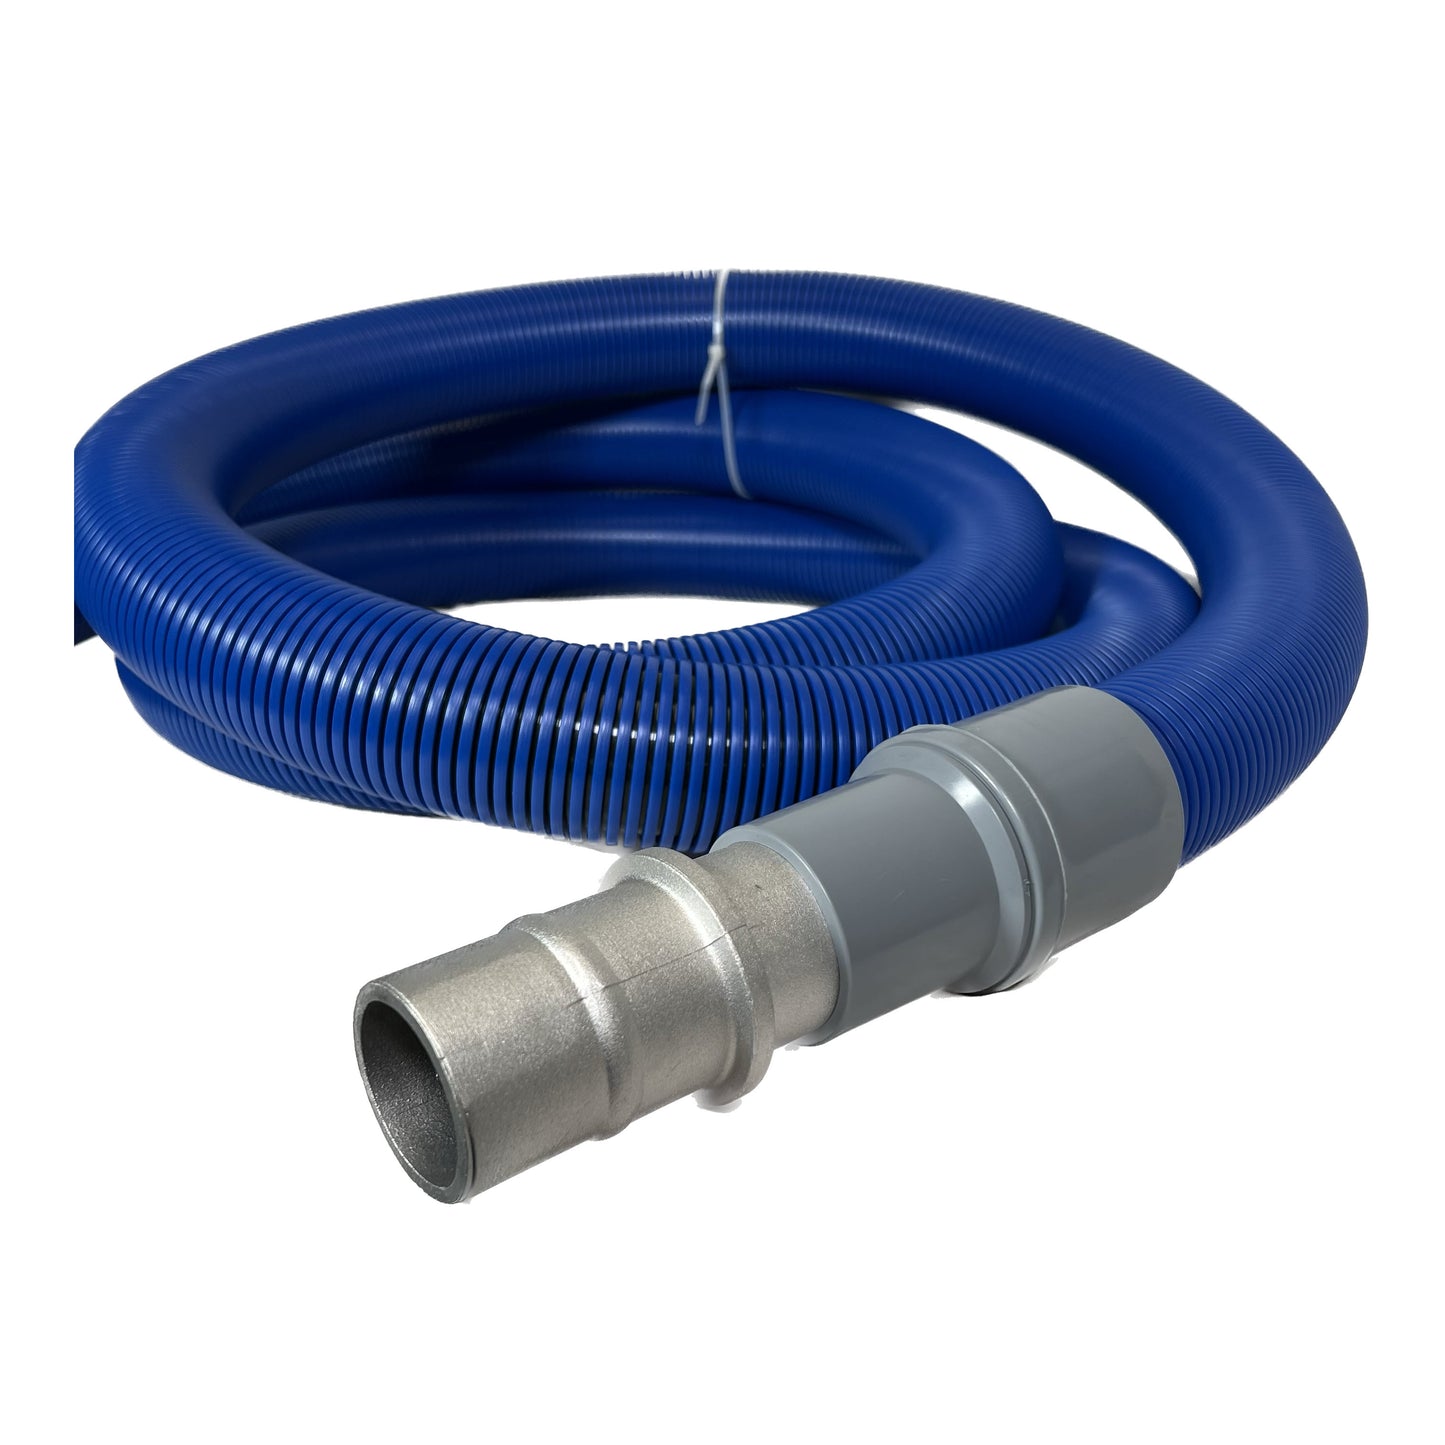 2" Crushproof Vacuum Hose with Cuffs, Flexaust Genesis® STM® Hose, Blue Color, 10', 15', 25' and 50' Lengths, Fits Latching and Non-Latching Inlet Valves